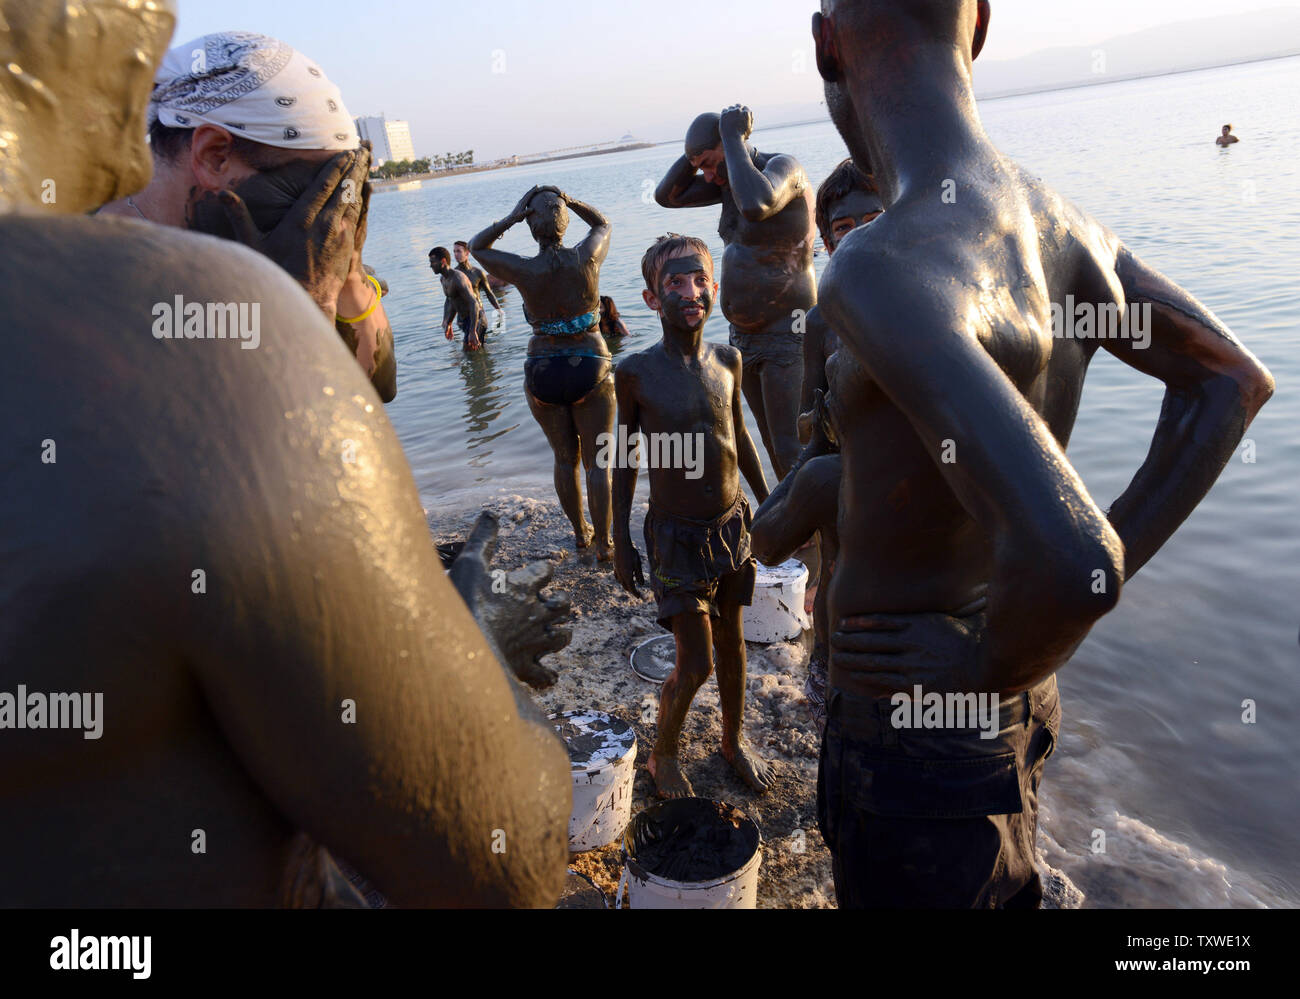 Israeli and international environmental and social activists apply black mud from the Dead Sea during a protest float at dawn against the deterioration of the Dead Sea, in an event organized by U.S. photographer Spencer Tunick, not seen, at Ein Bokek, Israel, September 14, 2012. UPI/Debbie Hill Stock Photo